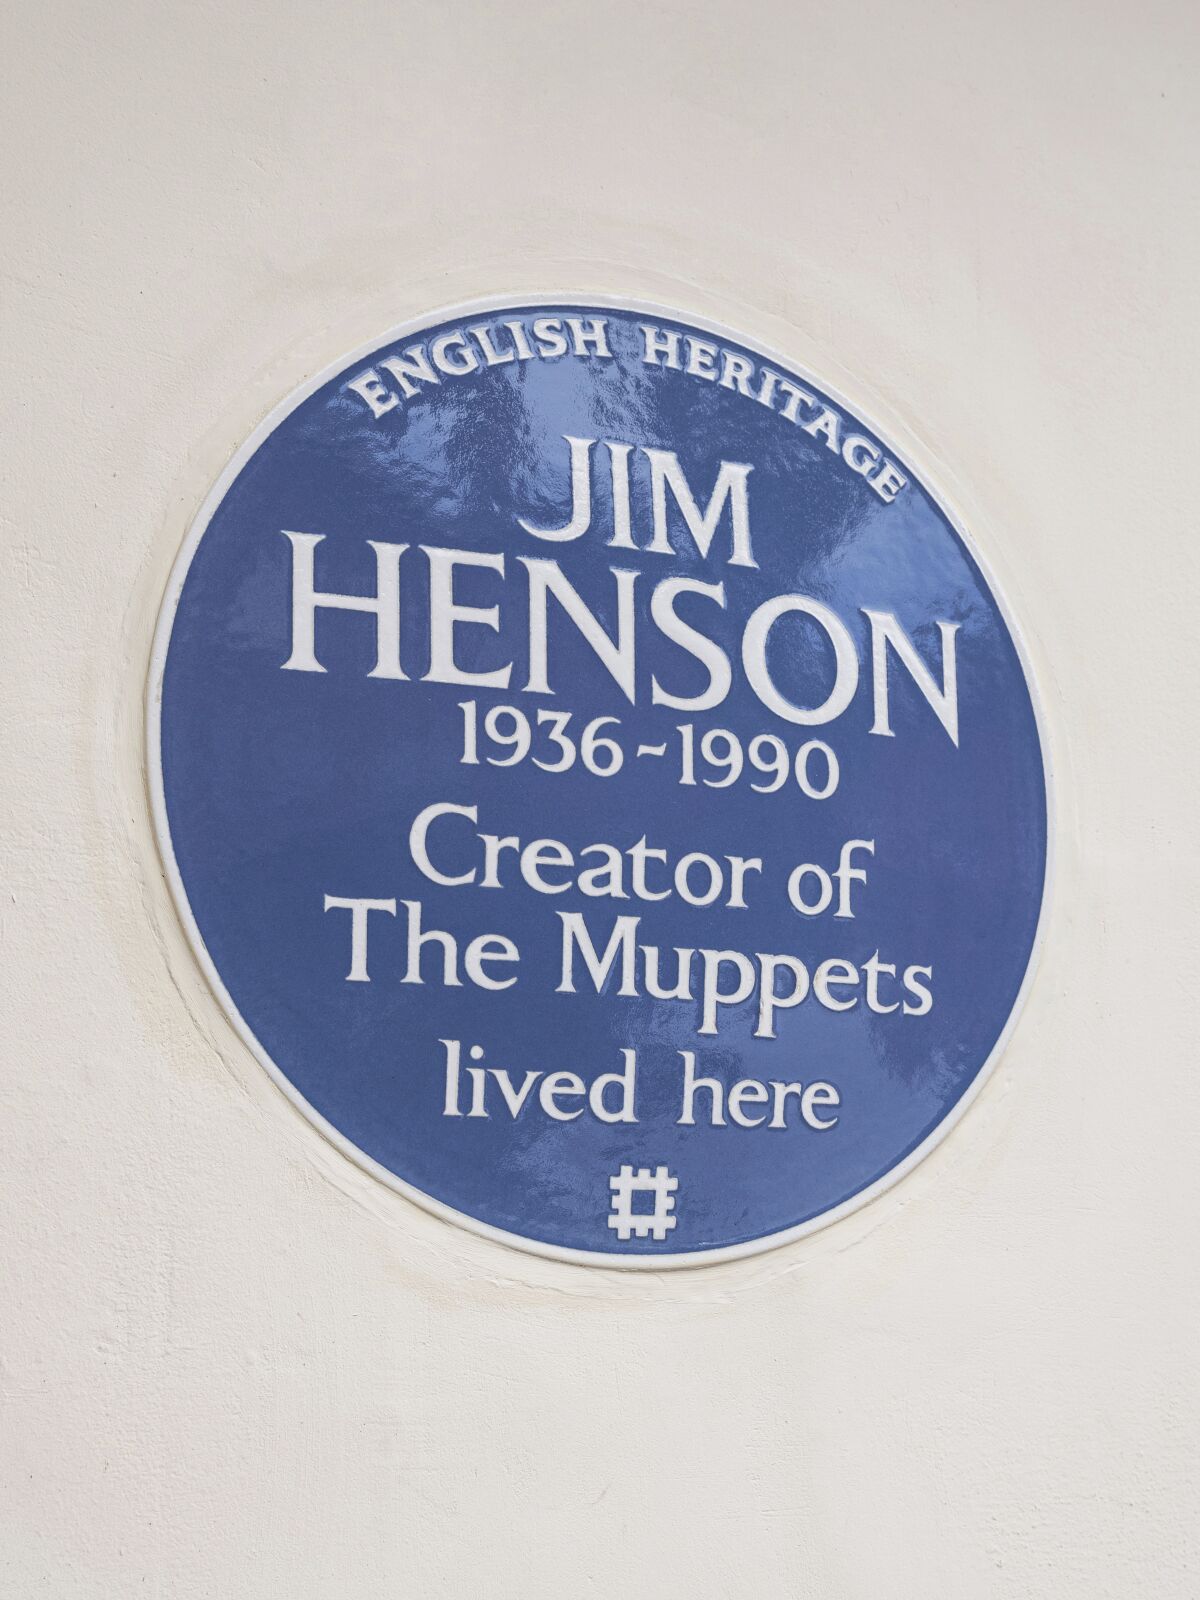 In this undated photo provided by English Heritage a view of the blue plaque on the former London home of Jim Henson, creator of The Muppets, who has been honoured with a blue plaque. The American creator of the Muppets was honored Tuesday, Sept, 7, 2021 in Britain with a blue plaque at his former home in north London, which he bought after ‘The Muppet Show’ was commissioned for British television — 50 Downshire Hill in Hampstead in north London to be precise. (English Heritage via AP)